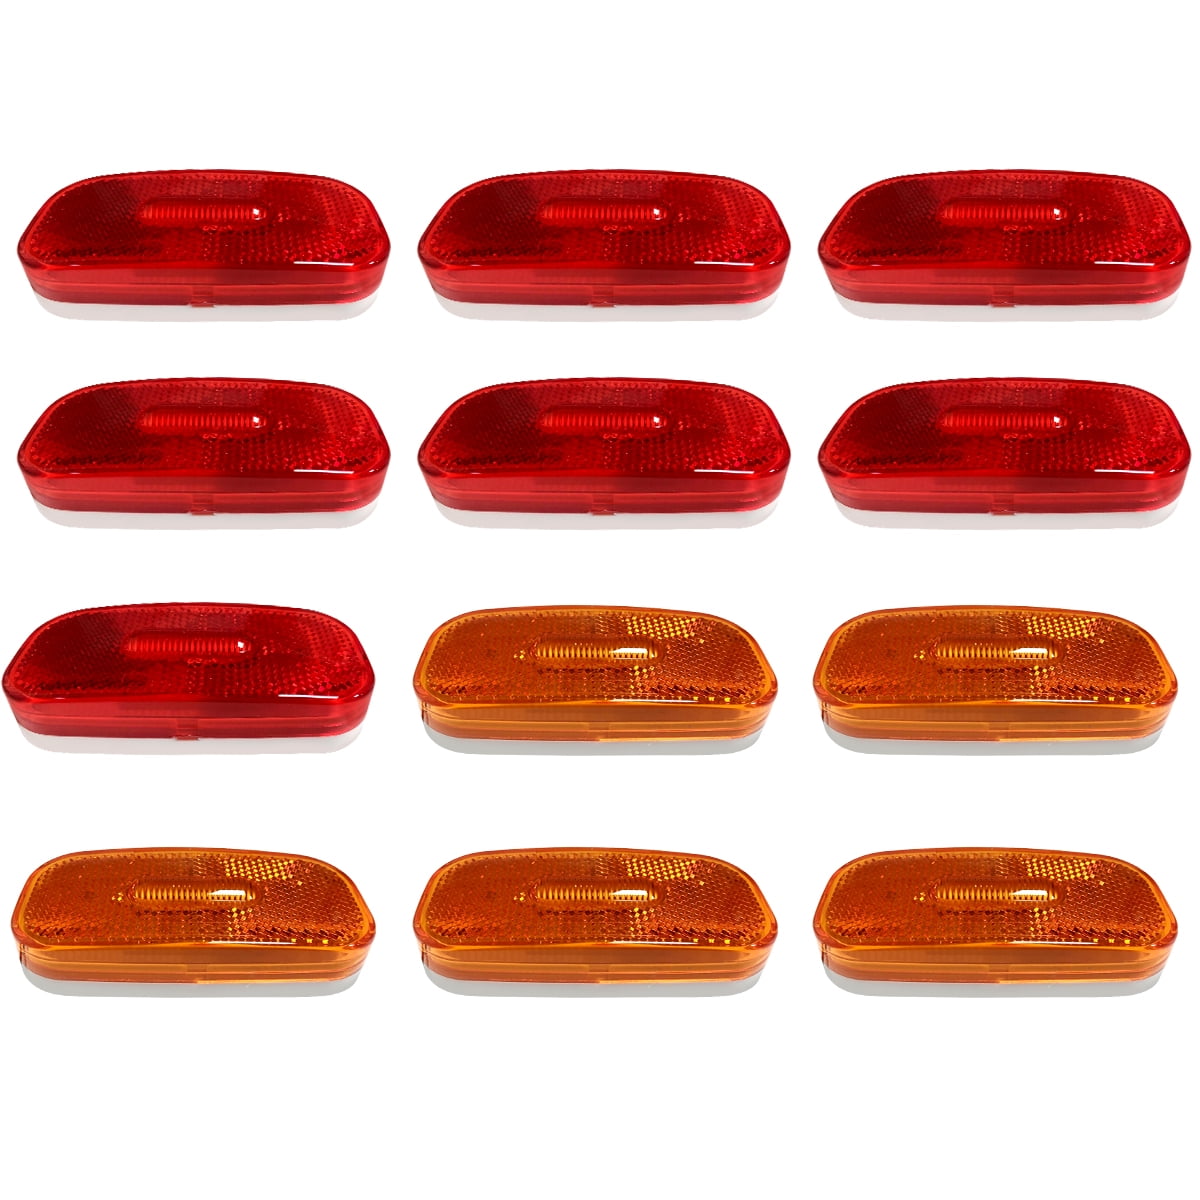 XCSOURCE 4pcs Red Oval LED Clearance/Side Marker Light Front Rear Indicator Lamp for Truck Trailer RV 12V/24V MA935 